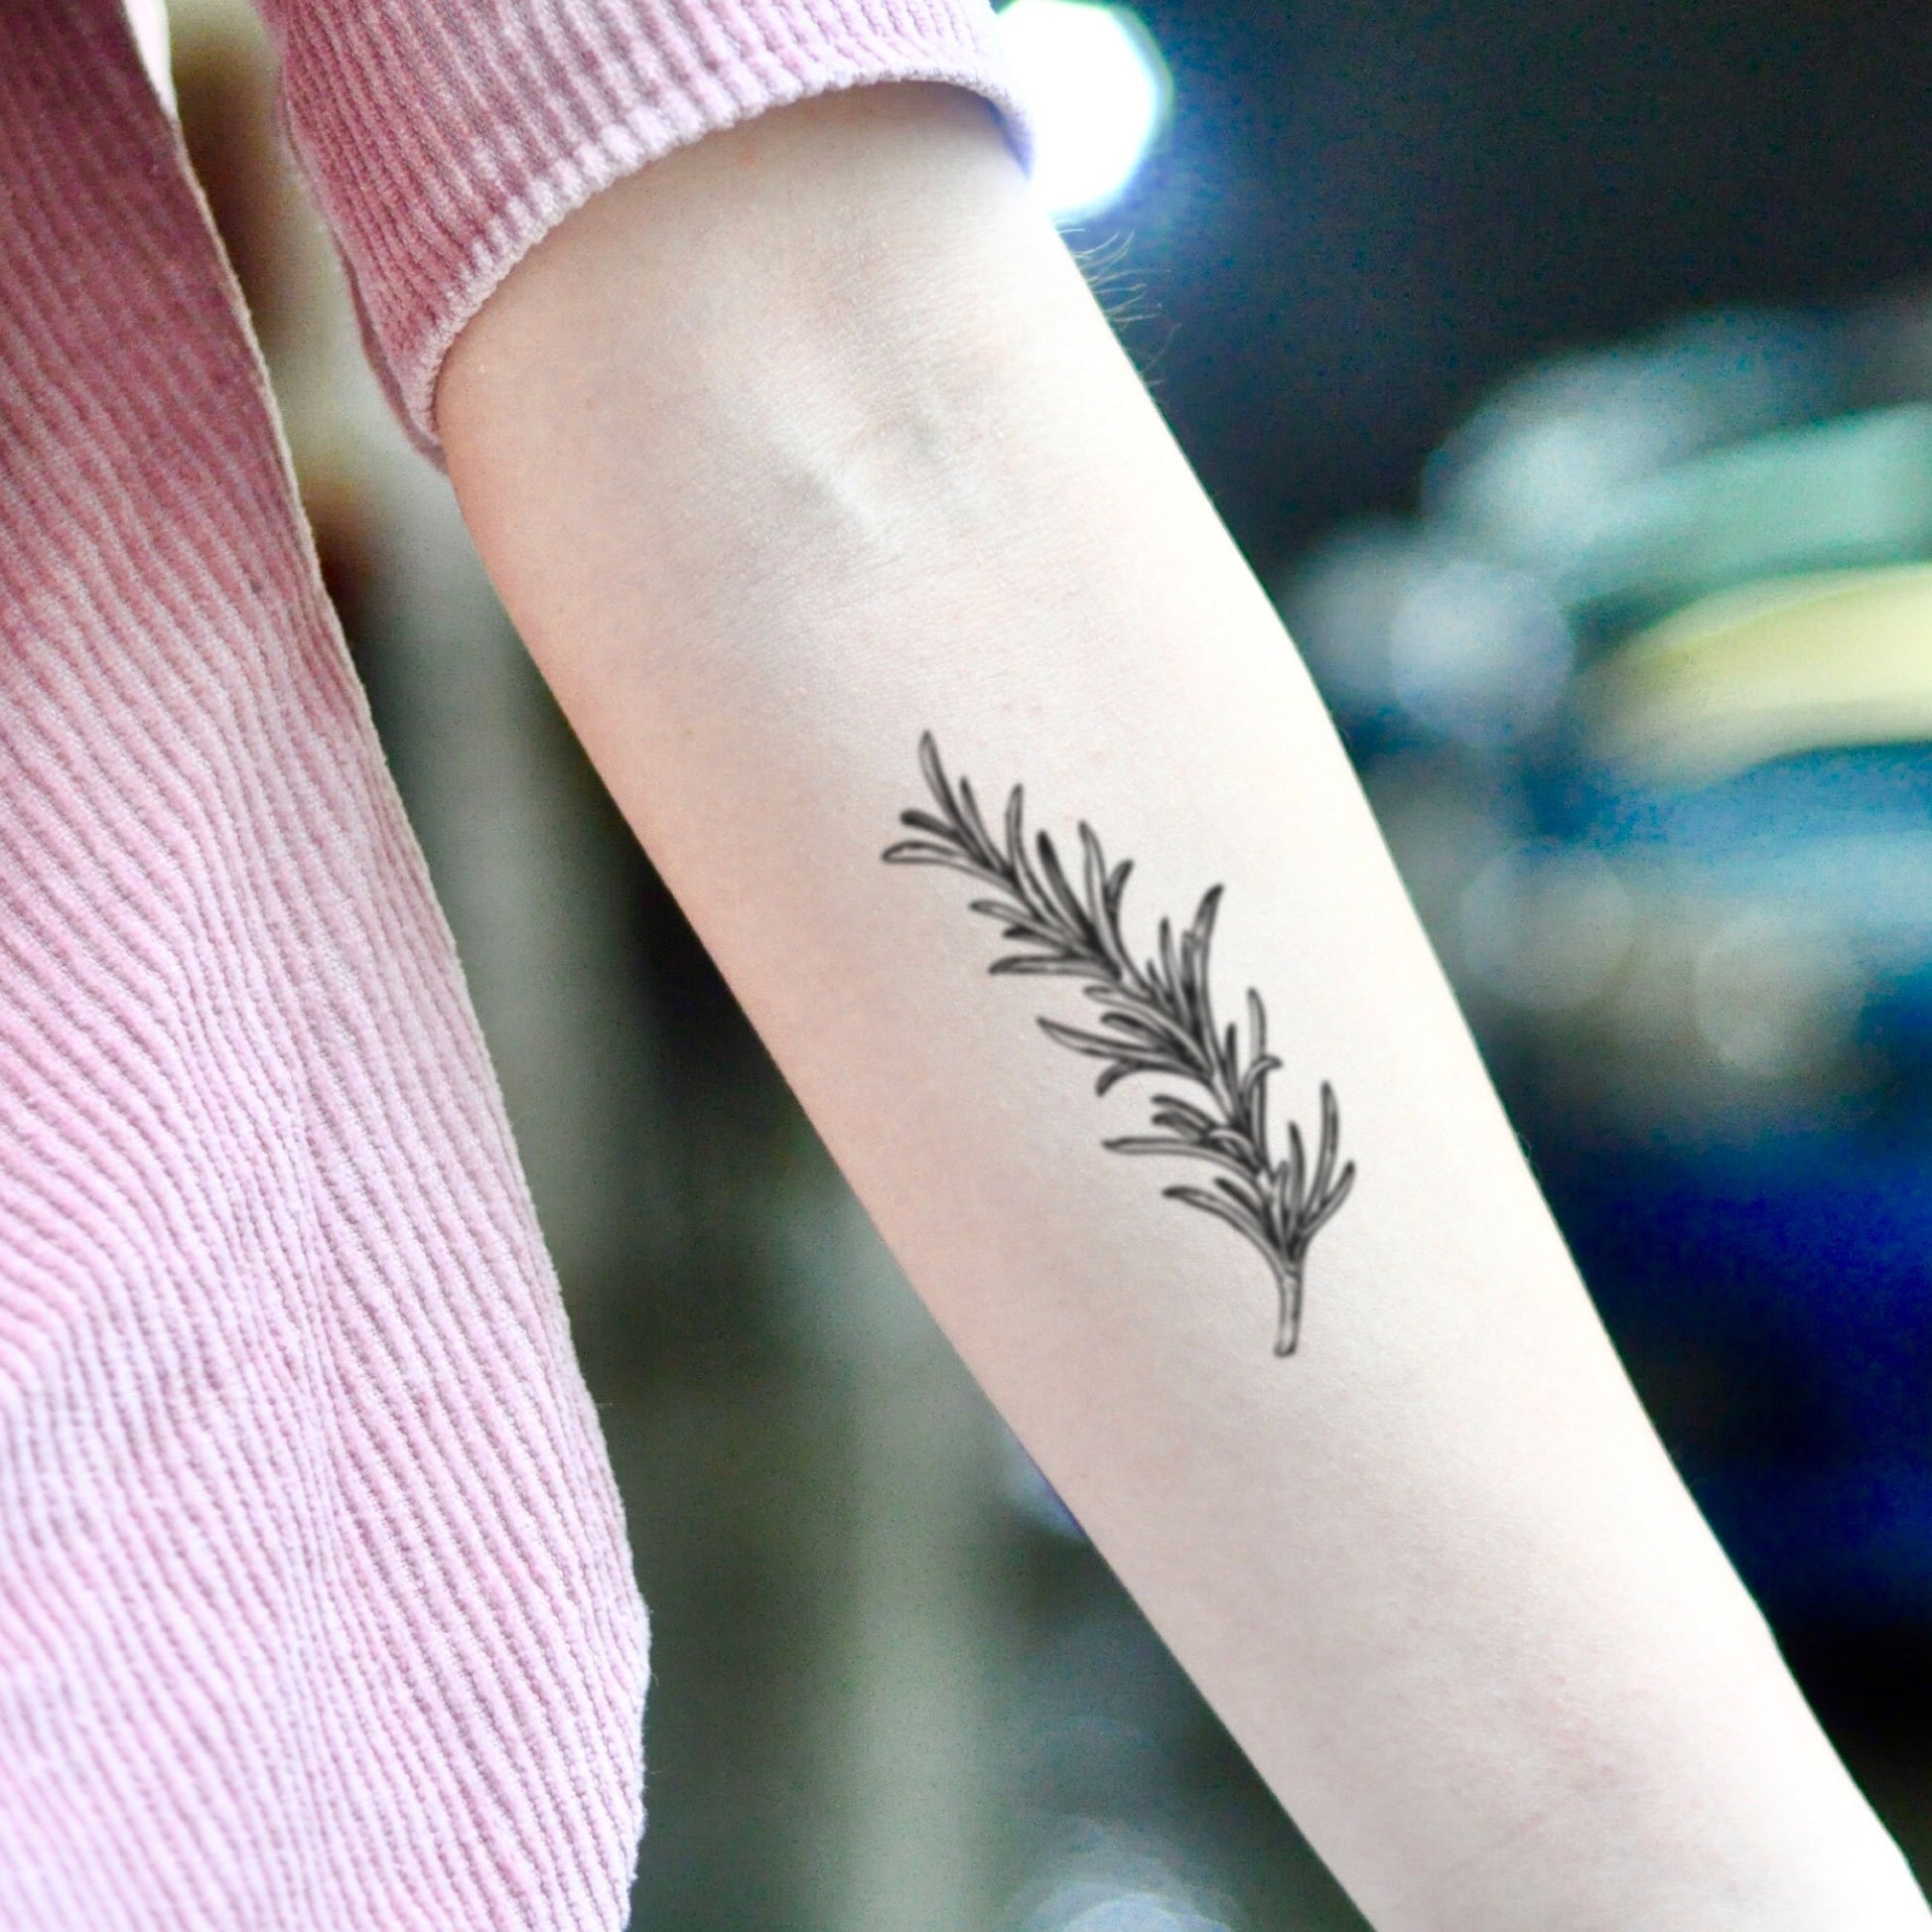 fake small sage rosemary thyme twig willow branch botanical minimalist temporary tattoo sticker design idea on inner arm